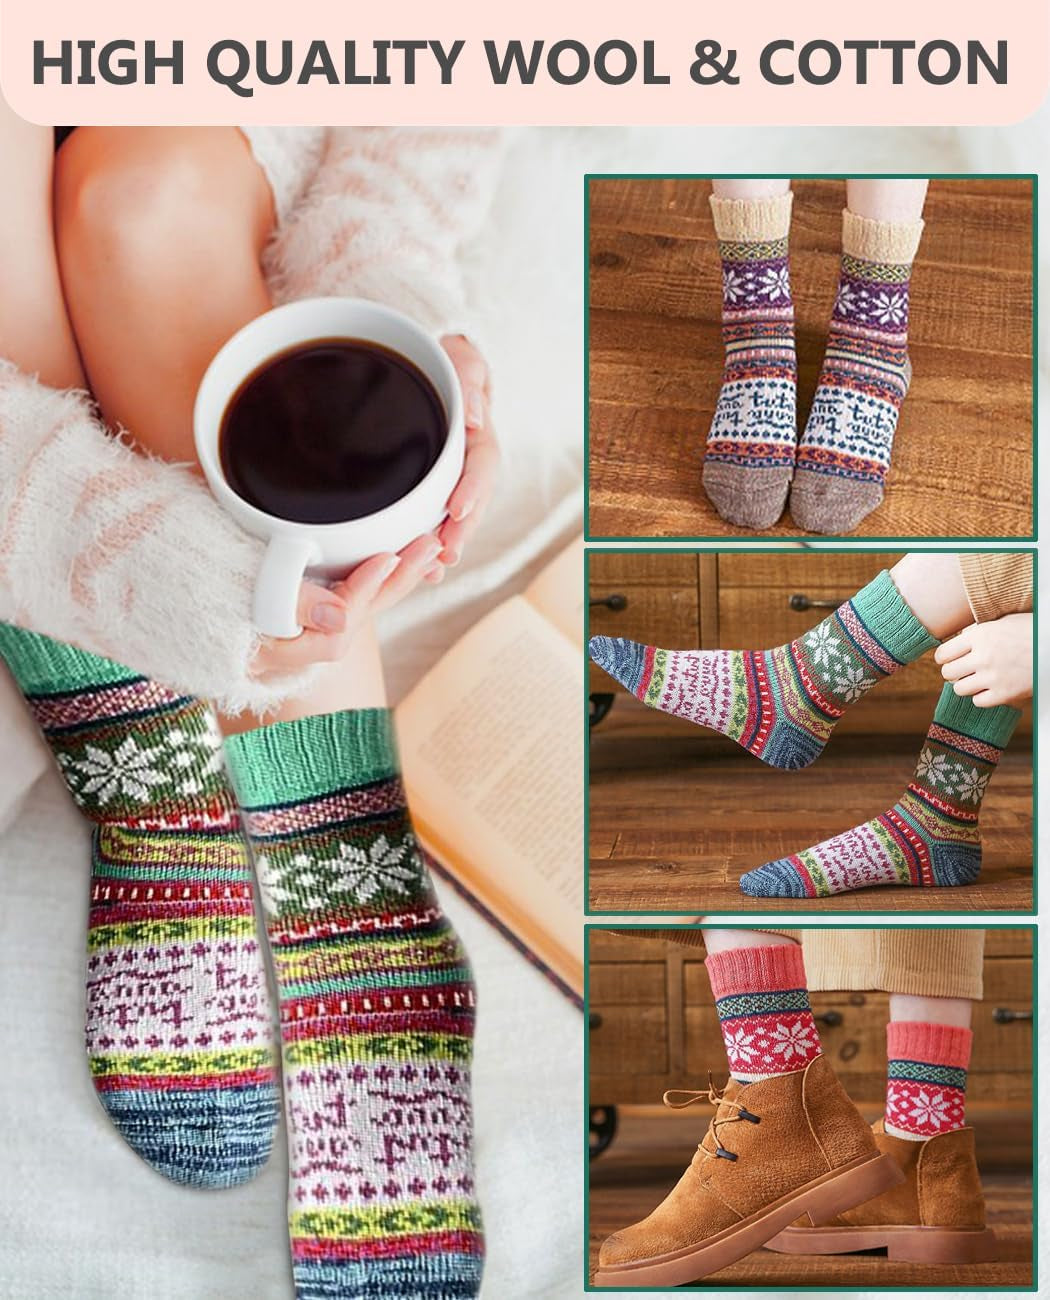 5 Pairs Womens Socks, Thermal Socks for Women, Thick Wool Winter Warm Knitting Ladies Bed Socks, Christmas Gifts for Women